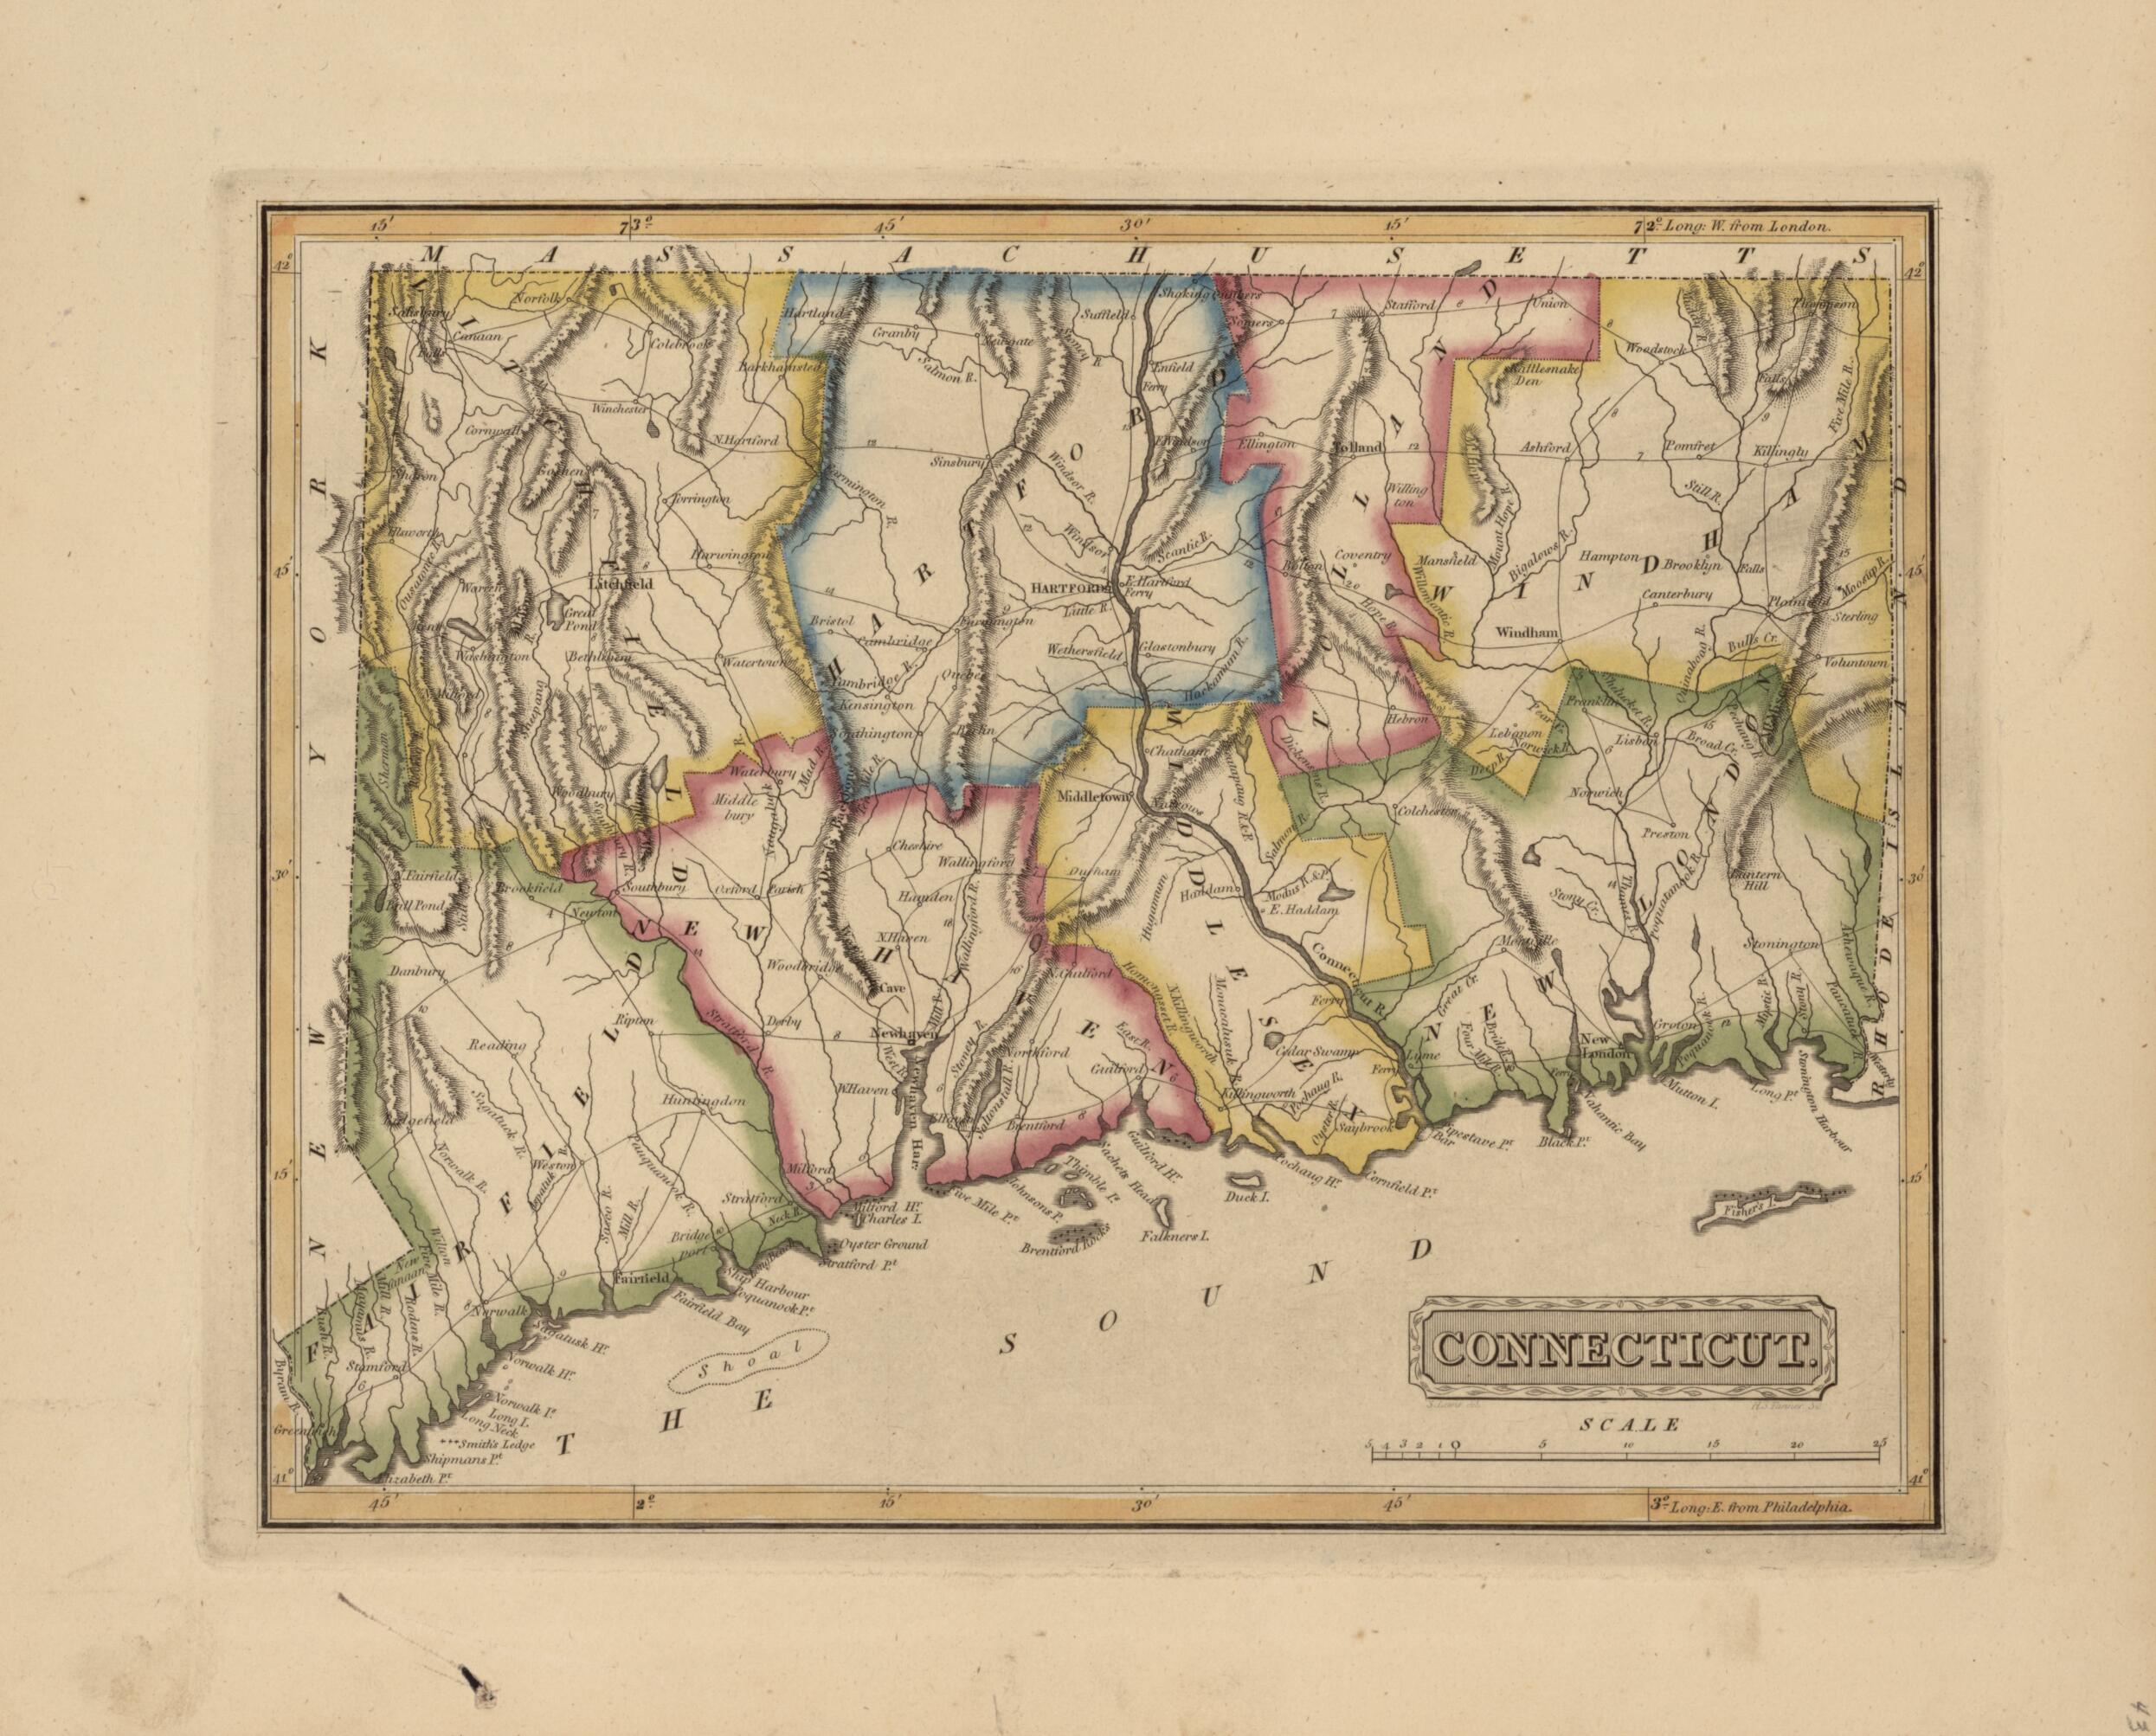 This old map of Connecticut from a New and Elegant General Atlas, Containing Maps of Each of the United States. from 1817 was created by Henry Schenck Tanner in 1817